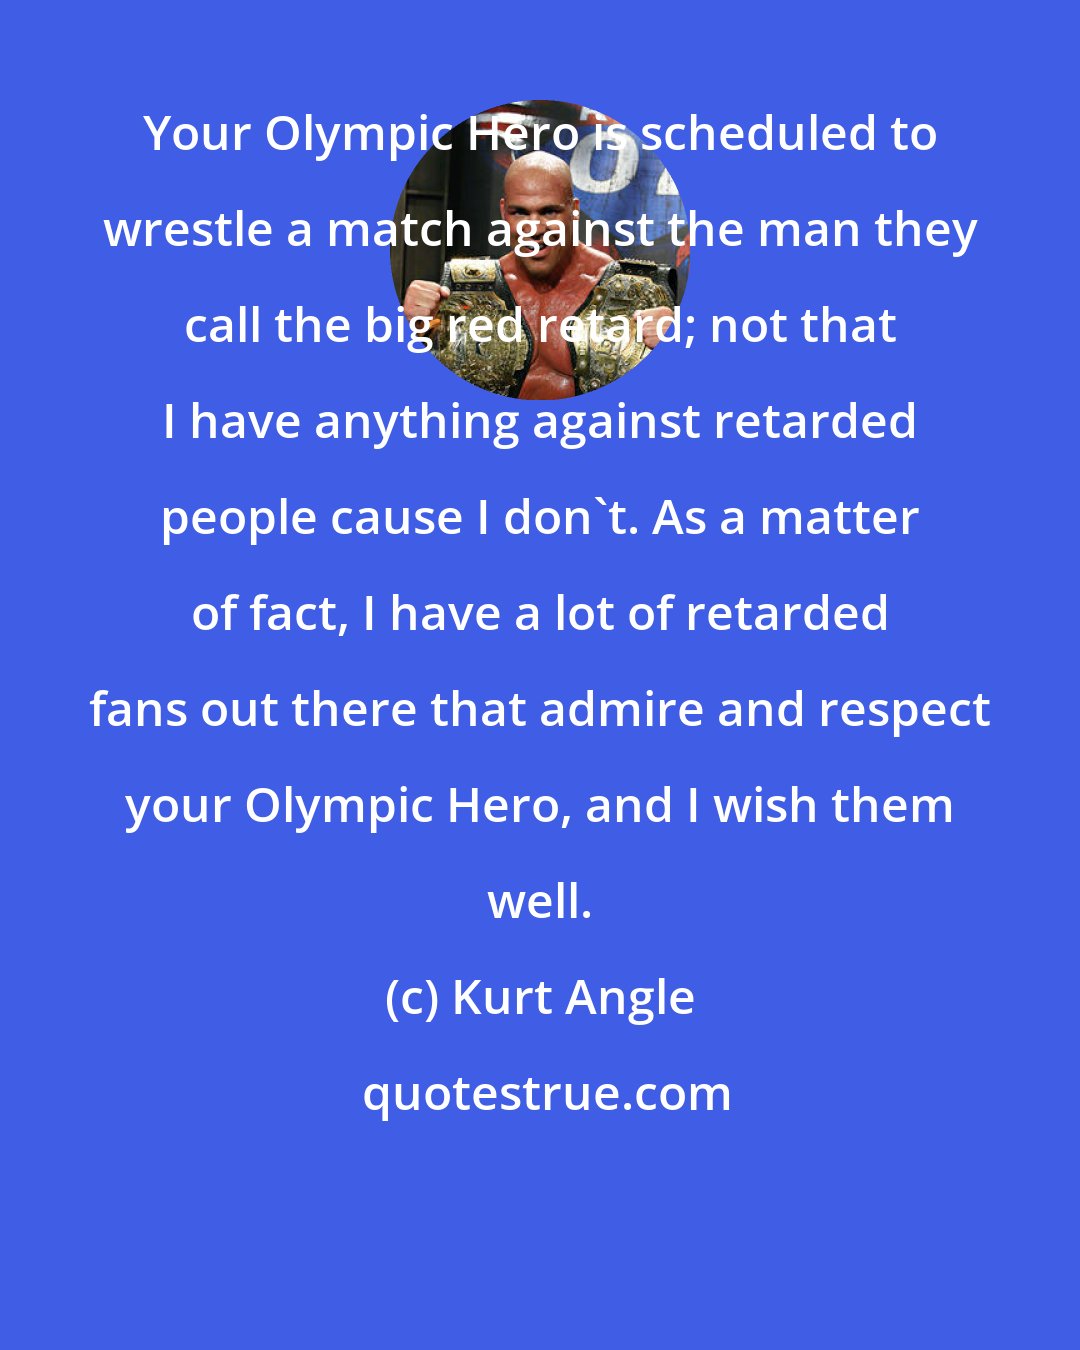 Kurt Angle: Your Olympic Hero is scheduled to wrestle a match against the man they call the big red retard; not that I have anything against retarded people cause I don't. As a matter of fact, I have a lot of retarded fans out there that admire and respect your Olympic Hero, and I wish them well.